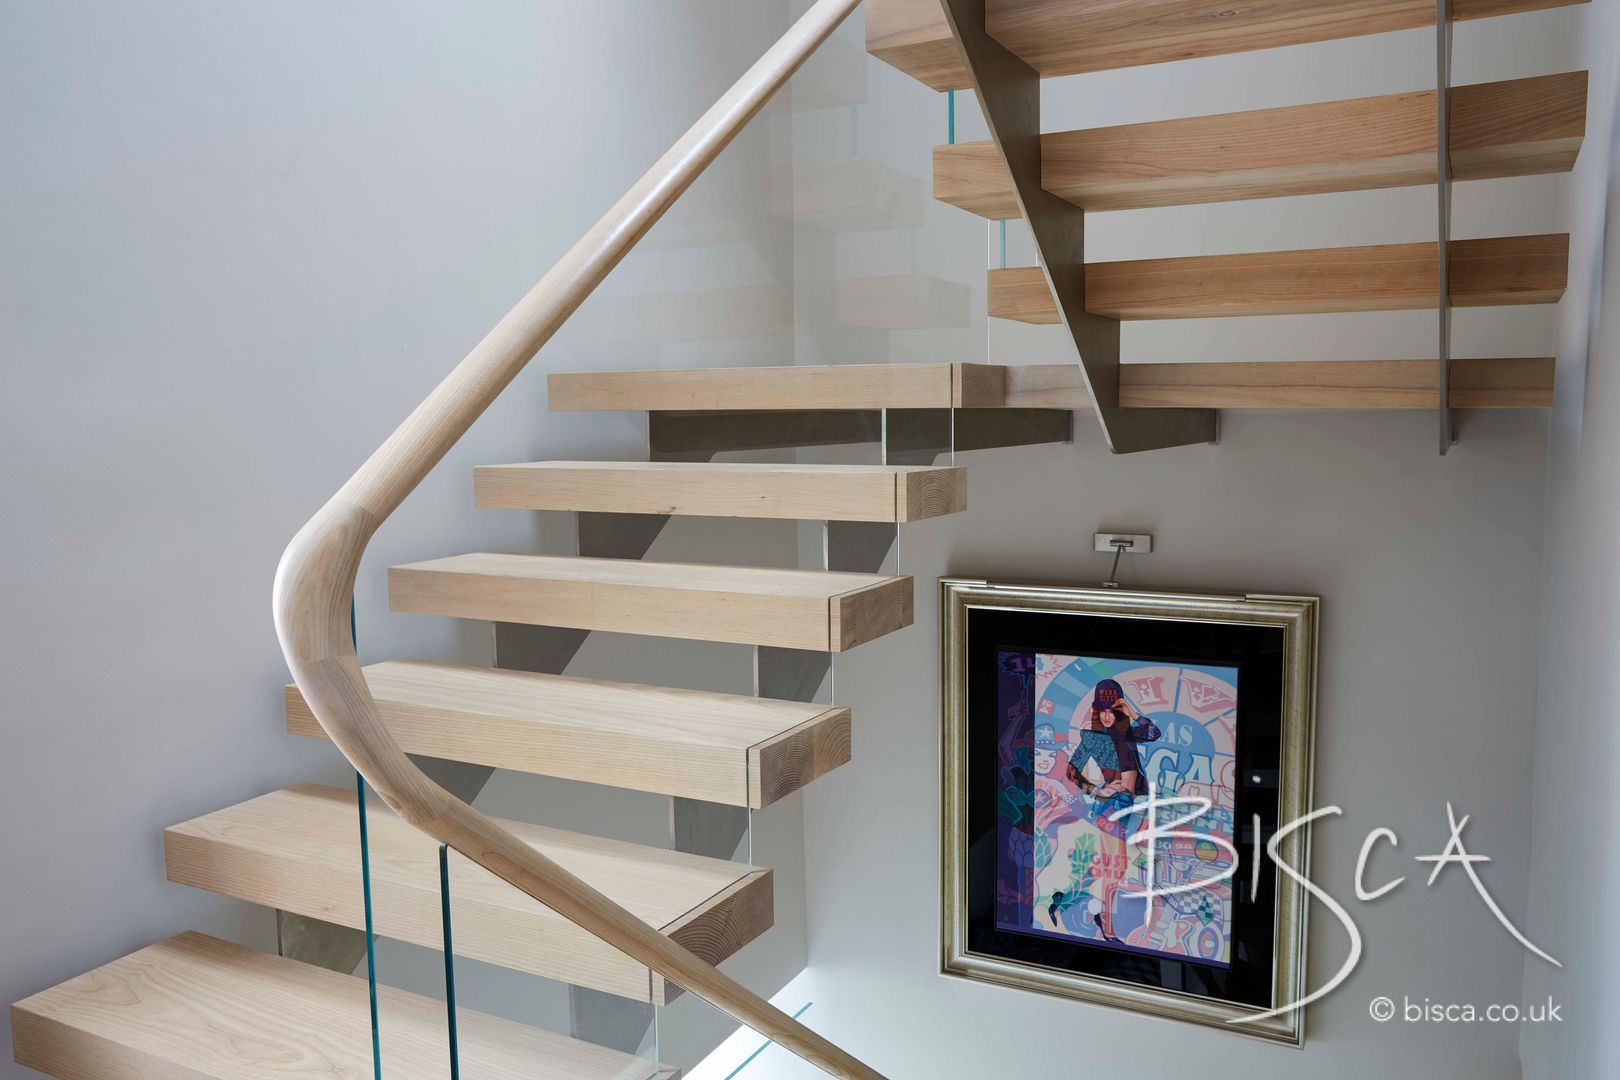 Multi Flight Staircase Design by Bisca Bisca Staircases Modern corridor, hallway & stairs staircase,stair